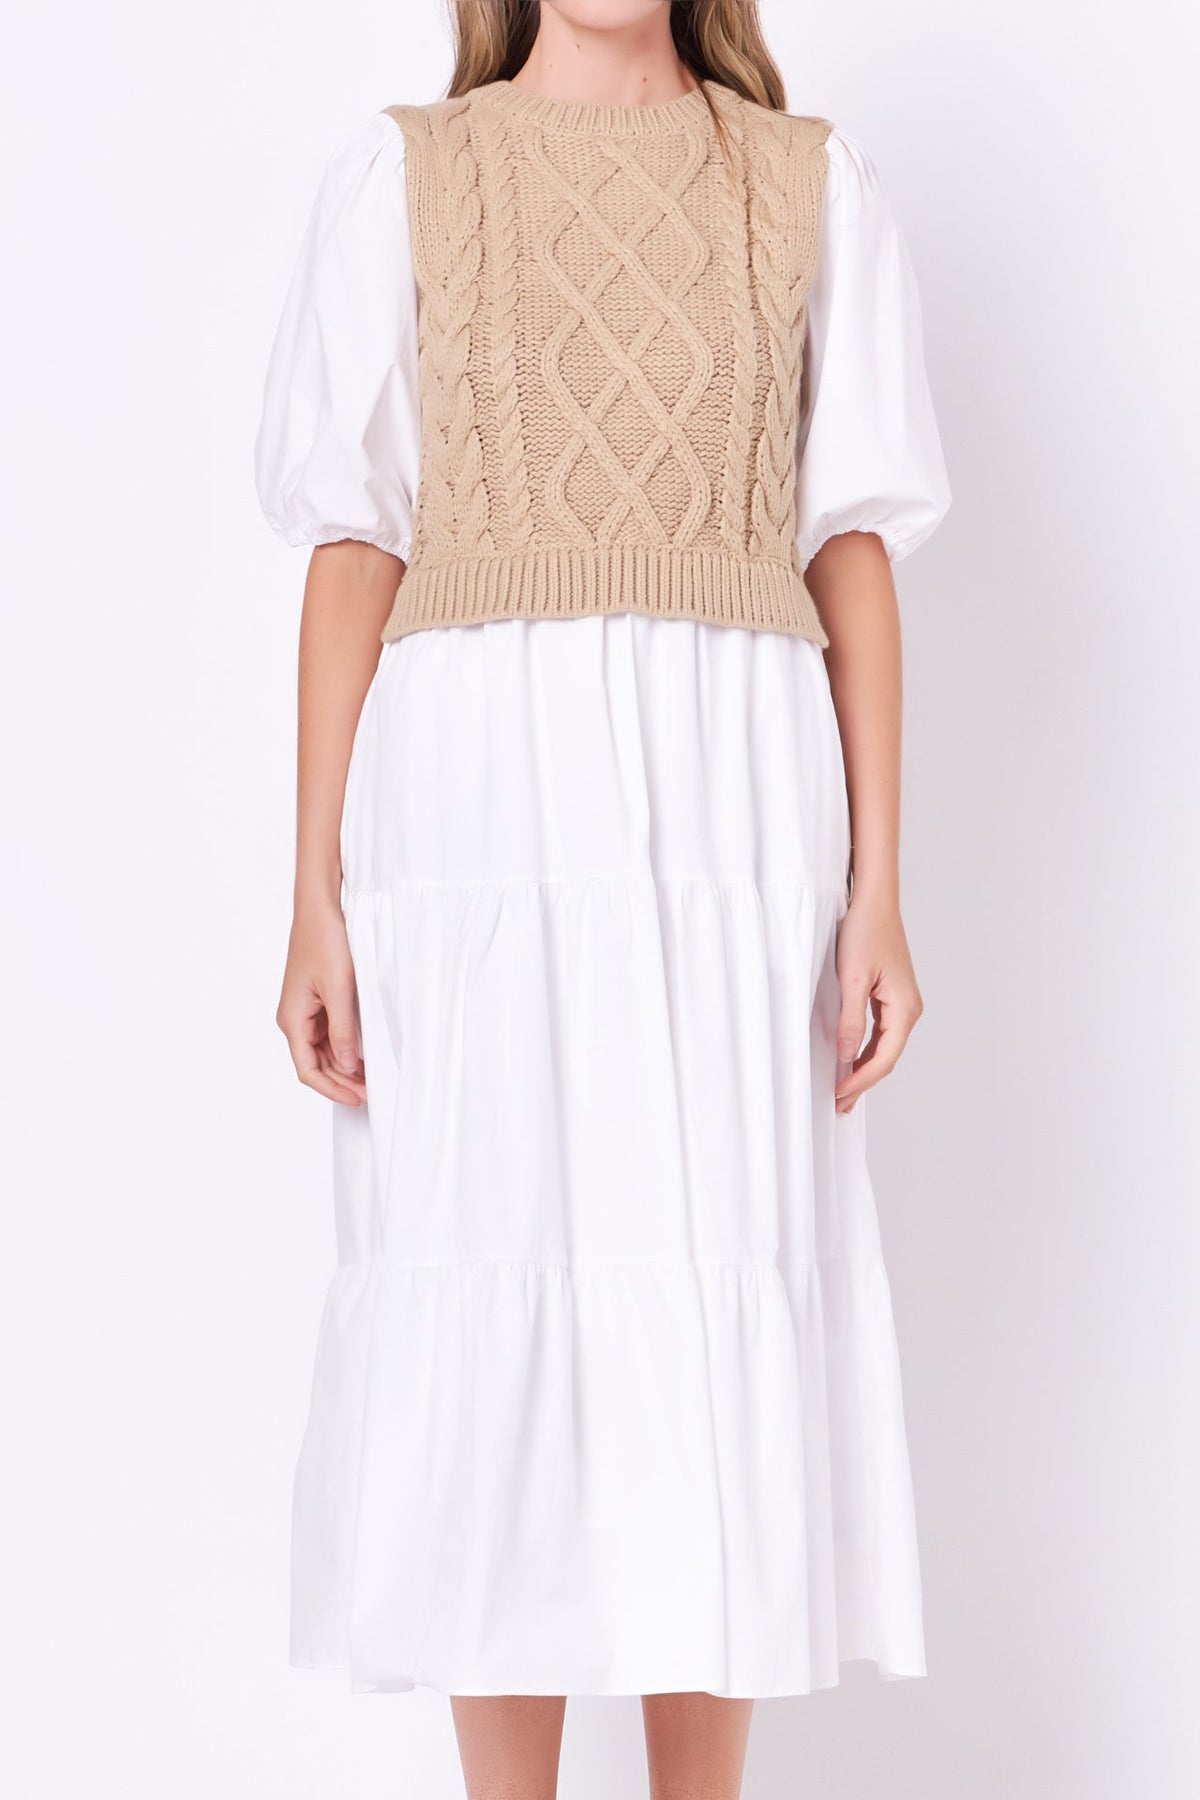 ENGLISH FACTORY - Mixed Media Cable Knit Down Midi Dress - DRESSES available at Objectrare